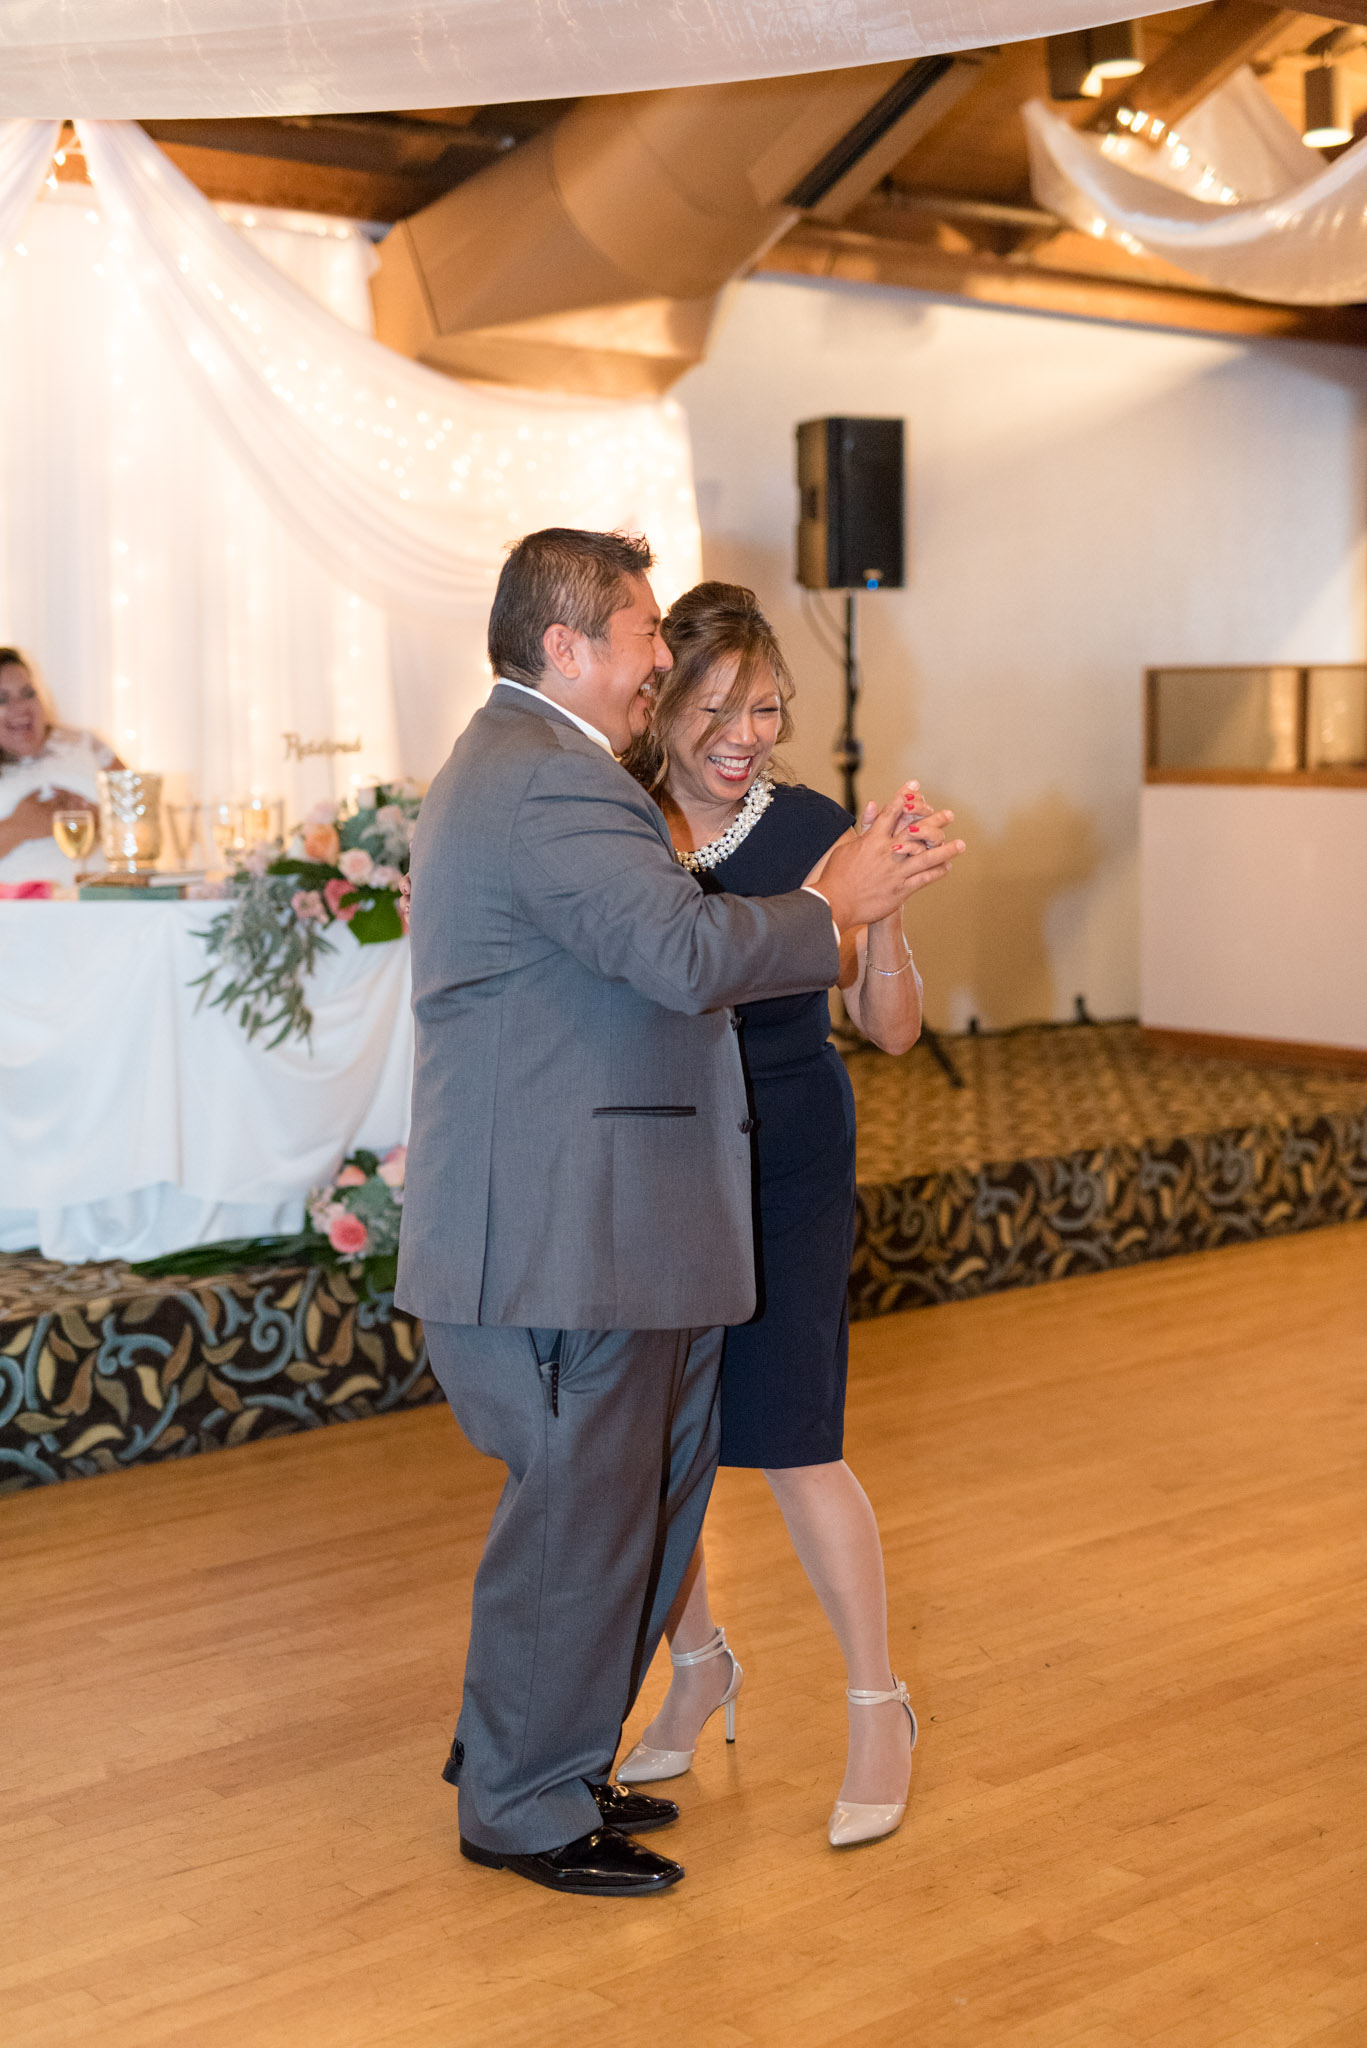 Groom and his mother dance at wedding reception.